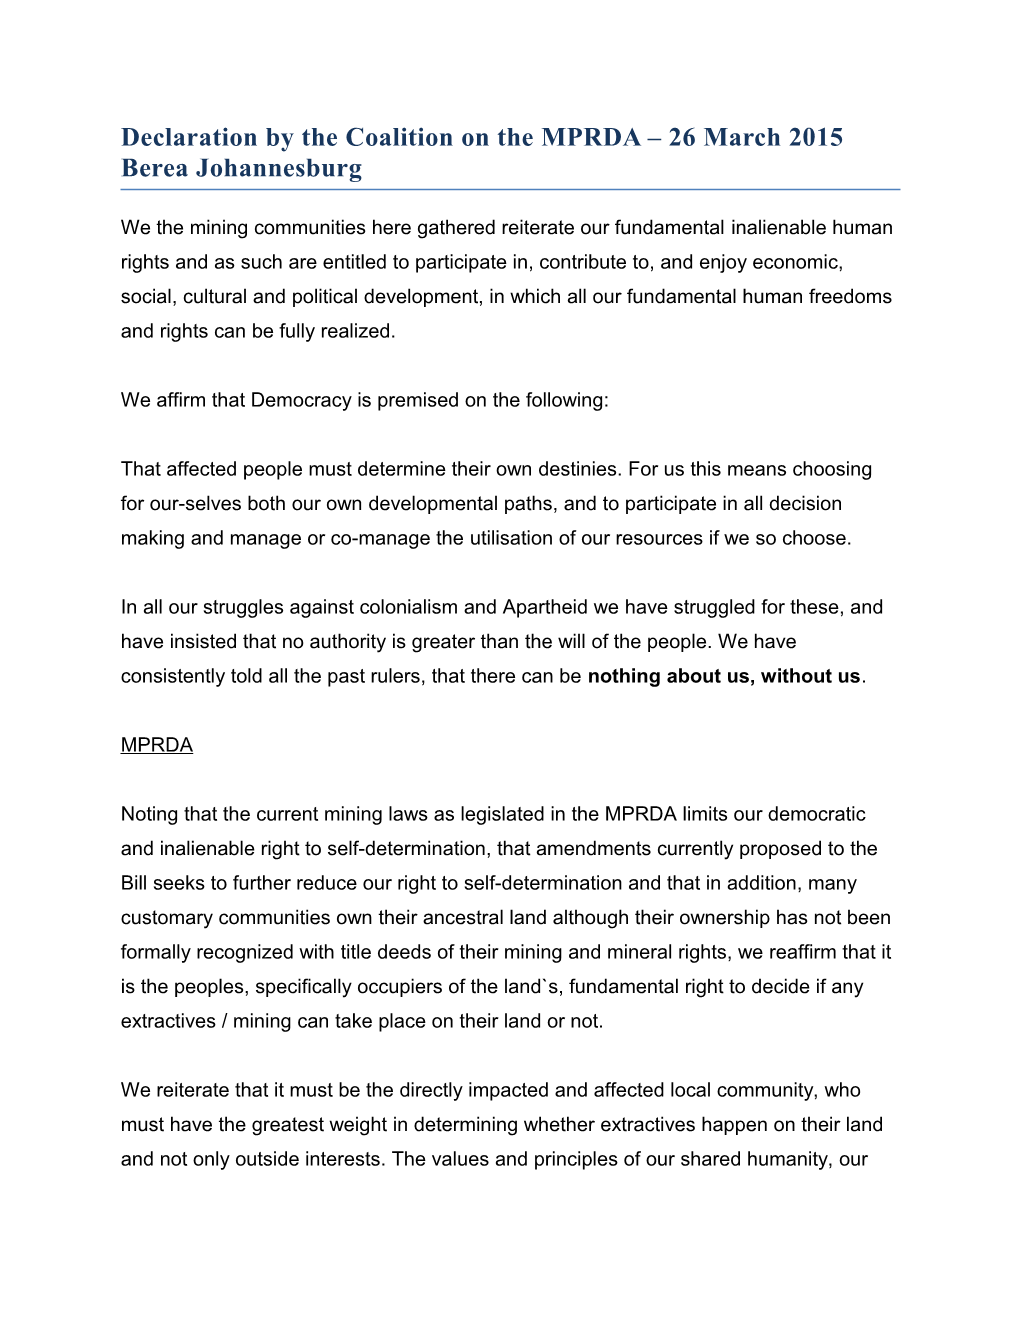 Declaration by the Coalition on the MPRDA 26 March 2015 Berea Johannesburg